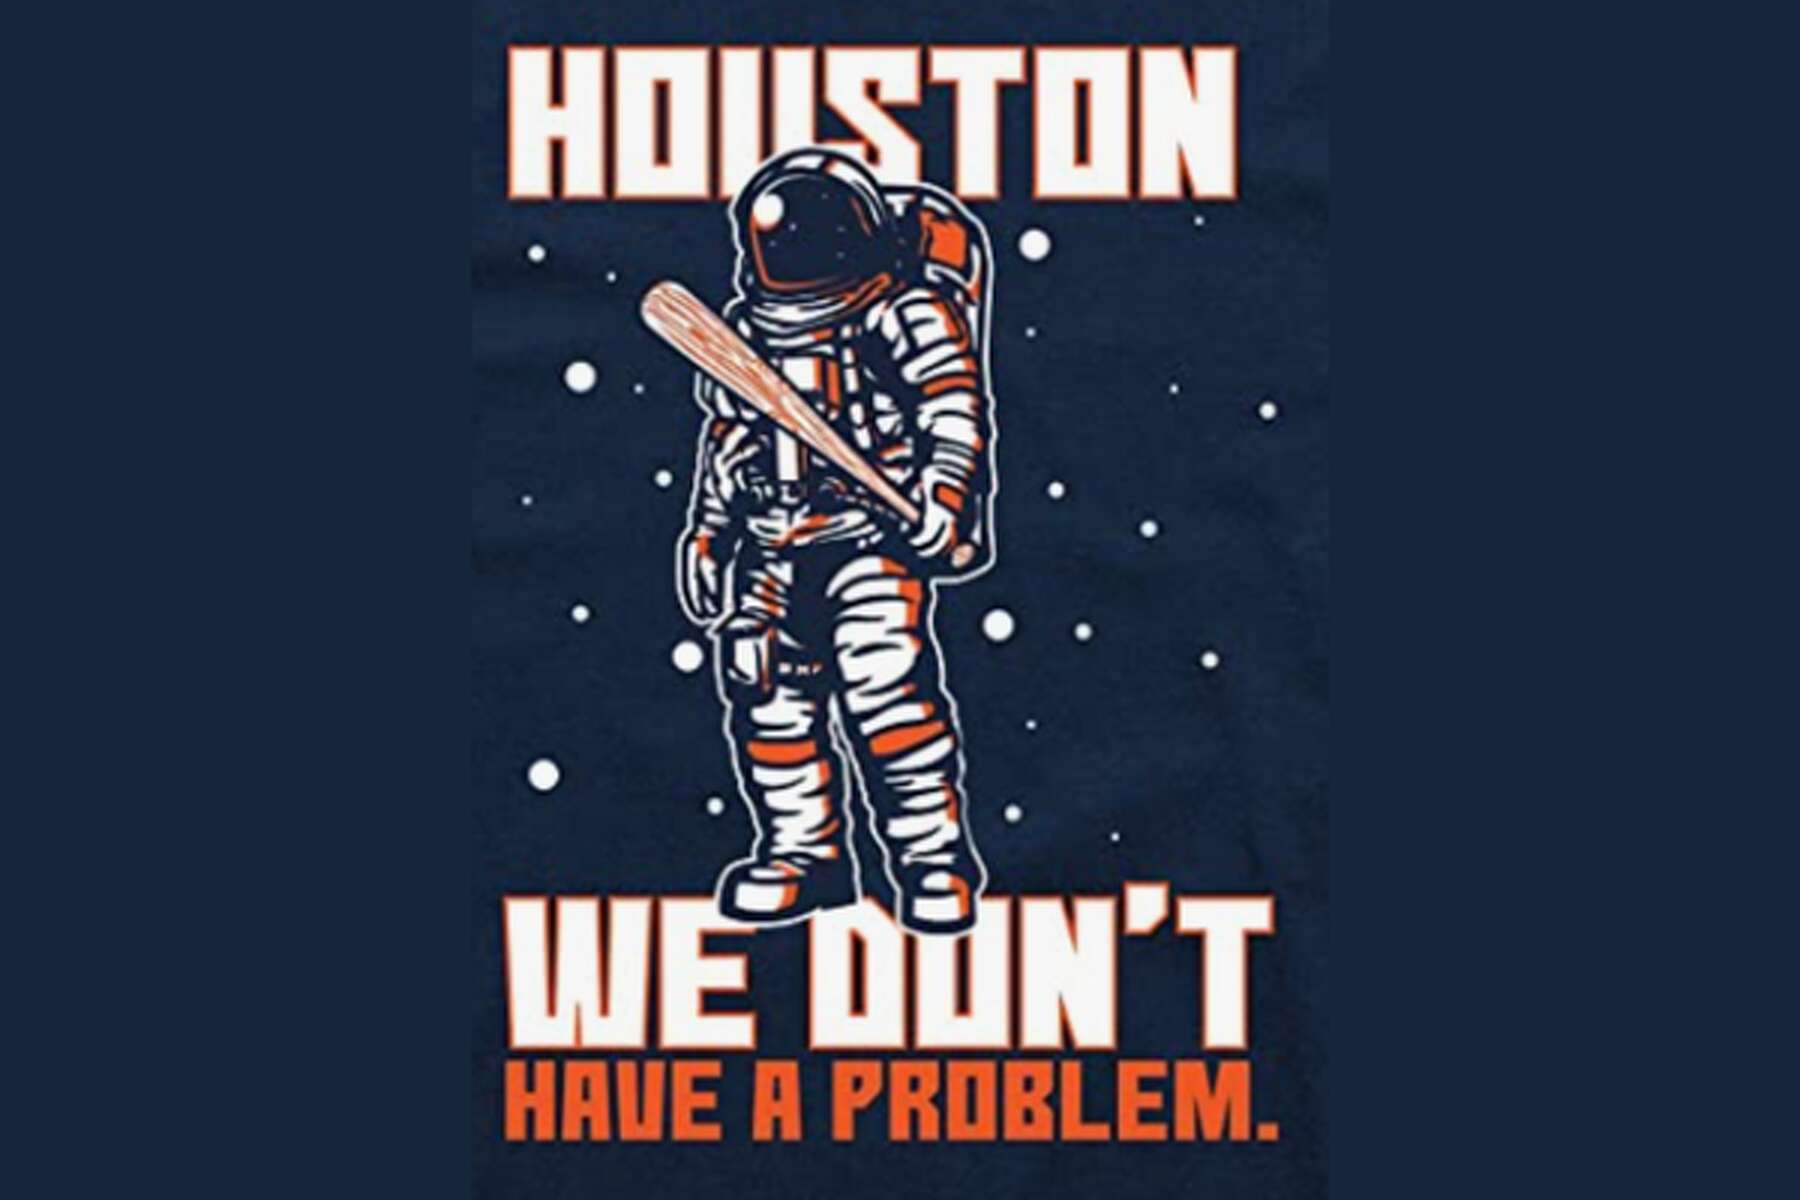 Houston Astros 2022 World Champions Haters Gonna Hate Shirt